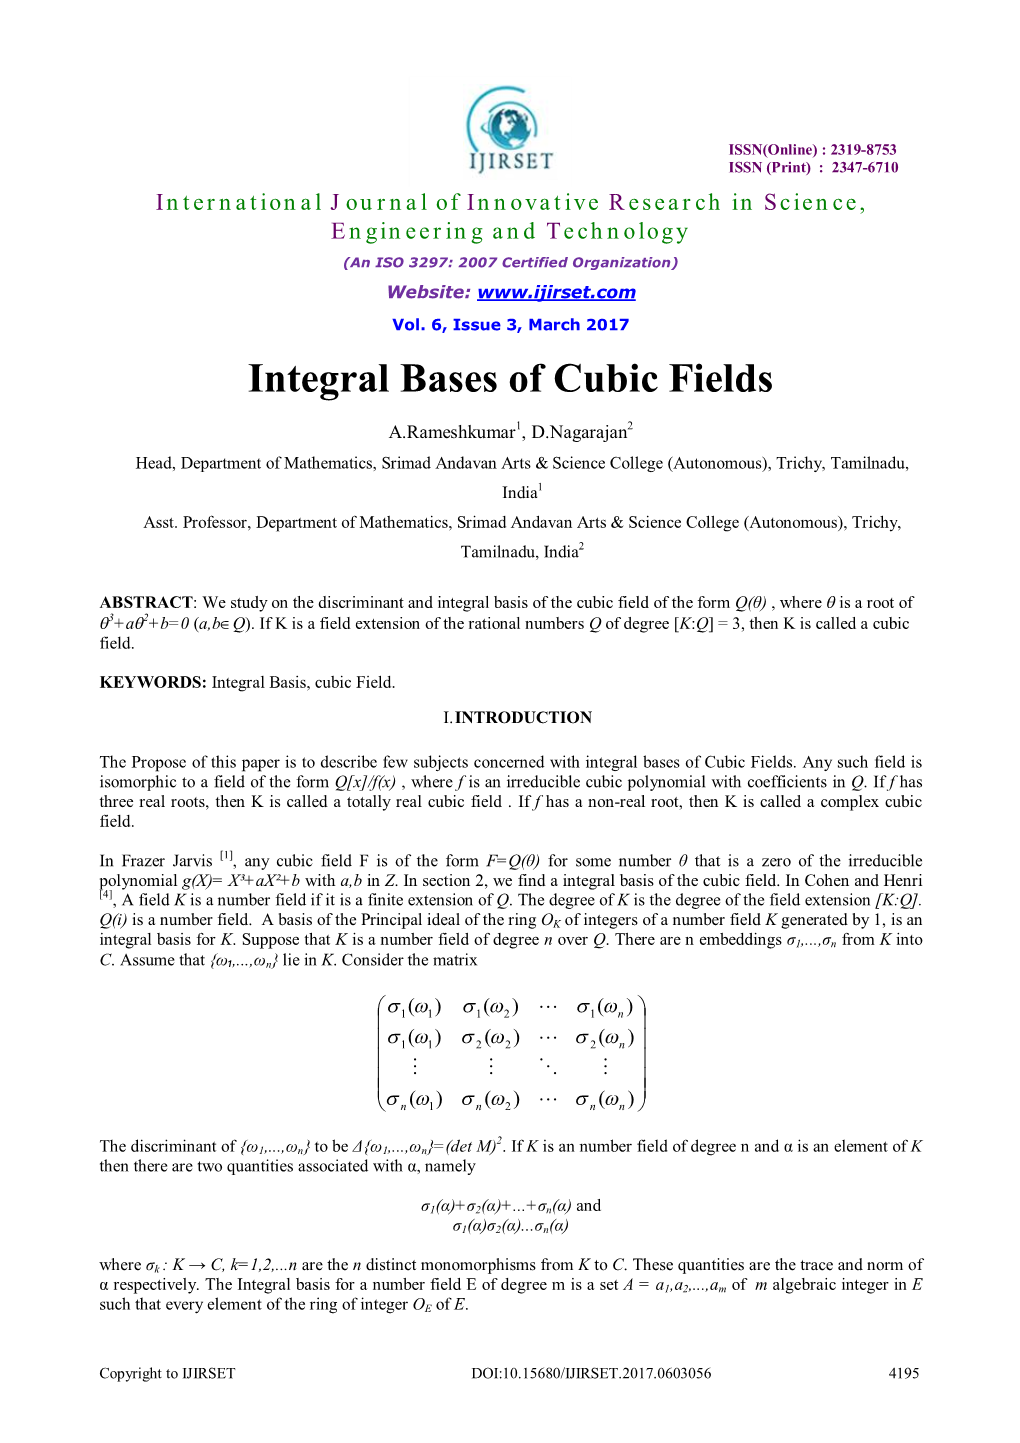 Integral Bases of Cubic Fields